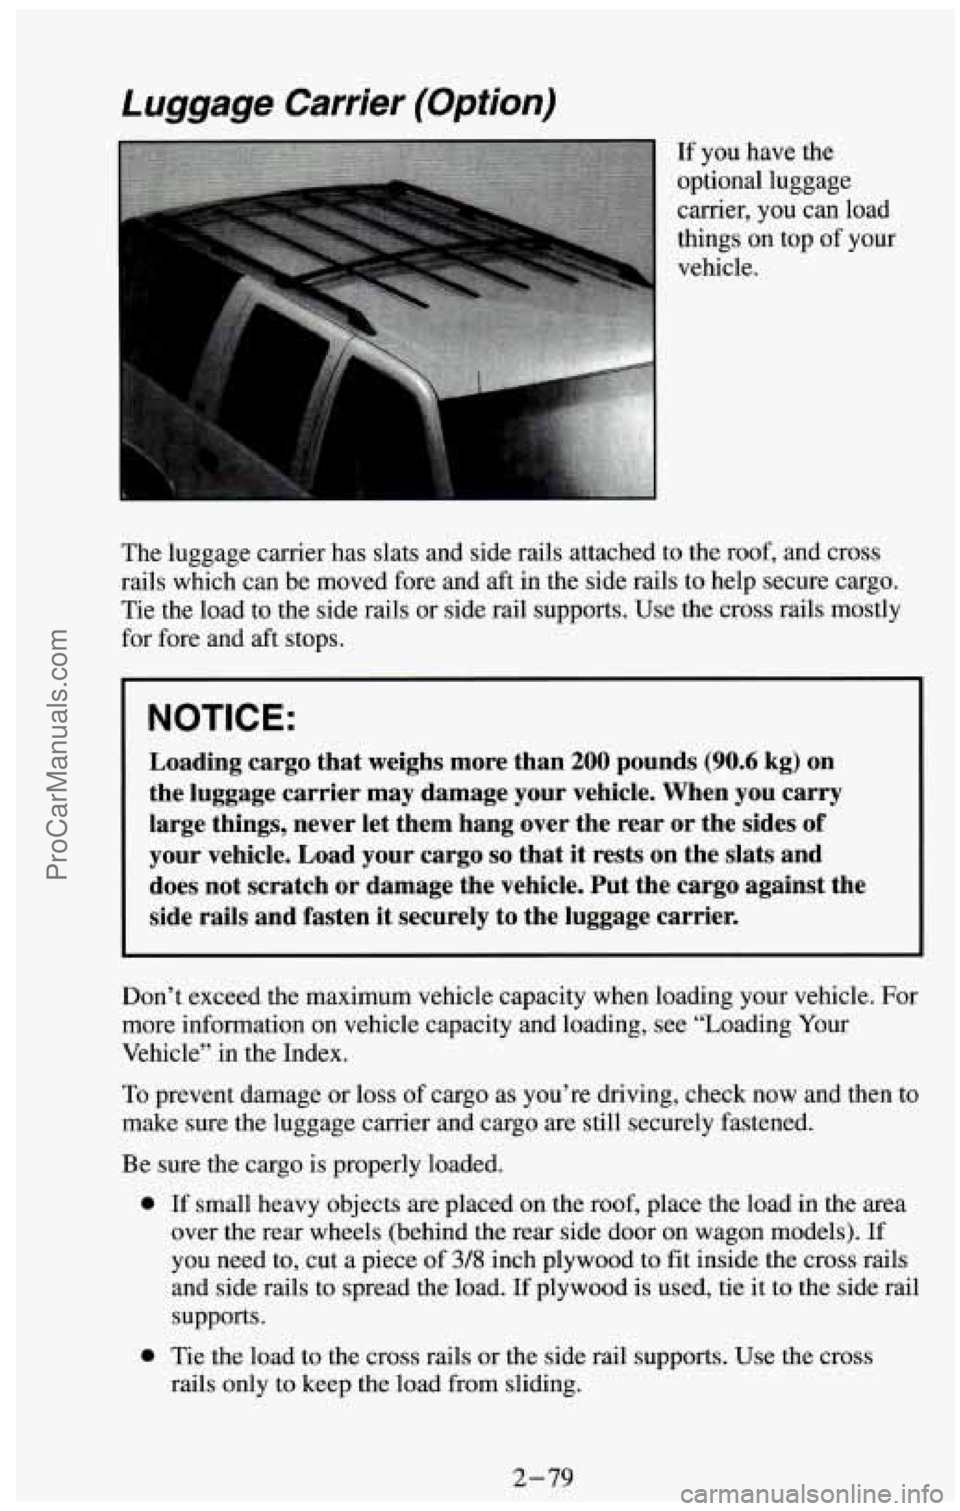 CHEVROLET SUBURBAN 1994  Owners Manual Luggage  Carrier  (Option) 
The  luggage carrier has slats and side rails attached to the roof, and  cross 
rails which  can be moved fore and aft  in the side rails to help secure cargo. 
Tie  the lo